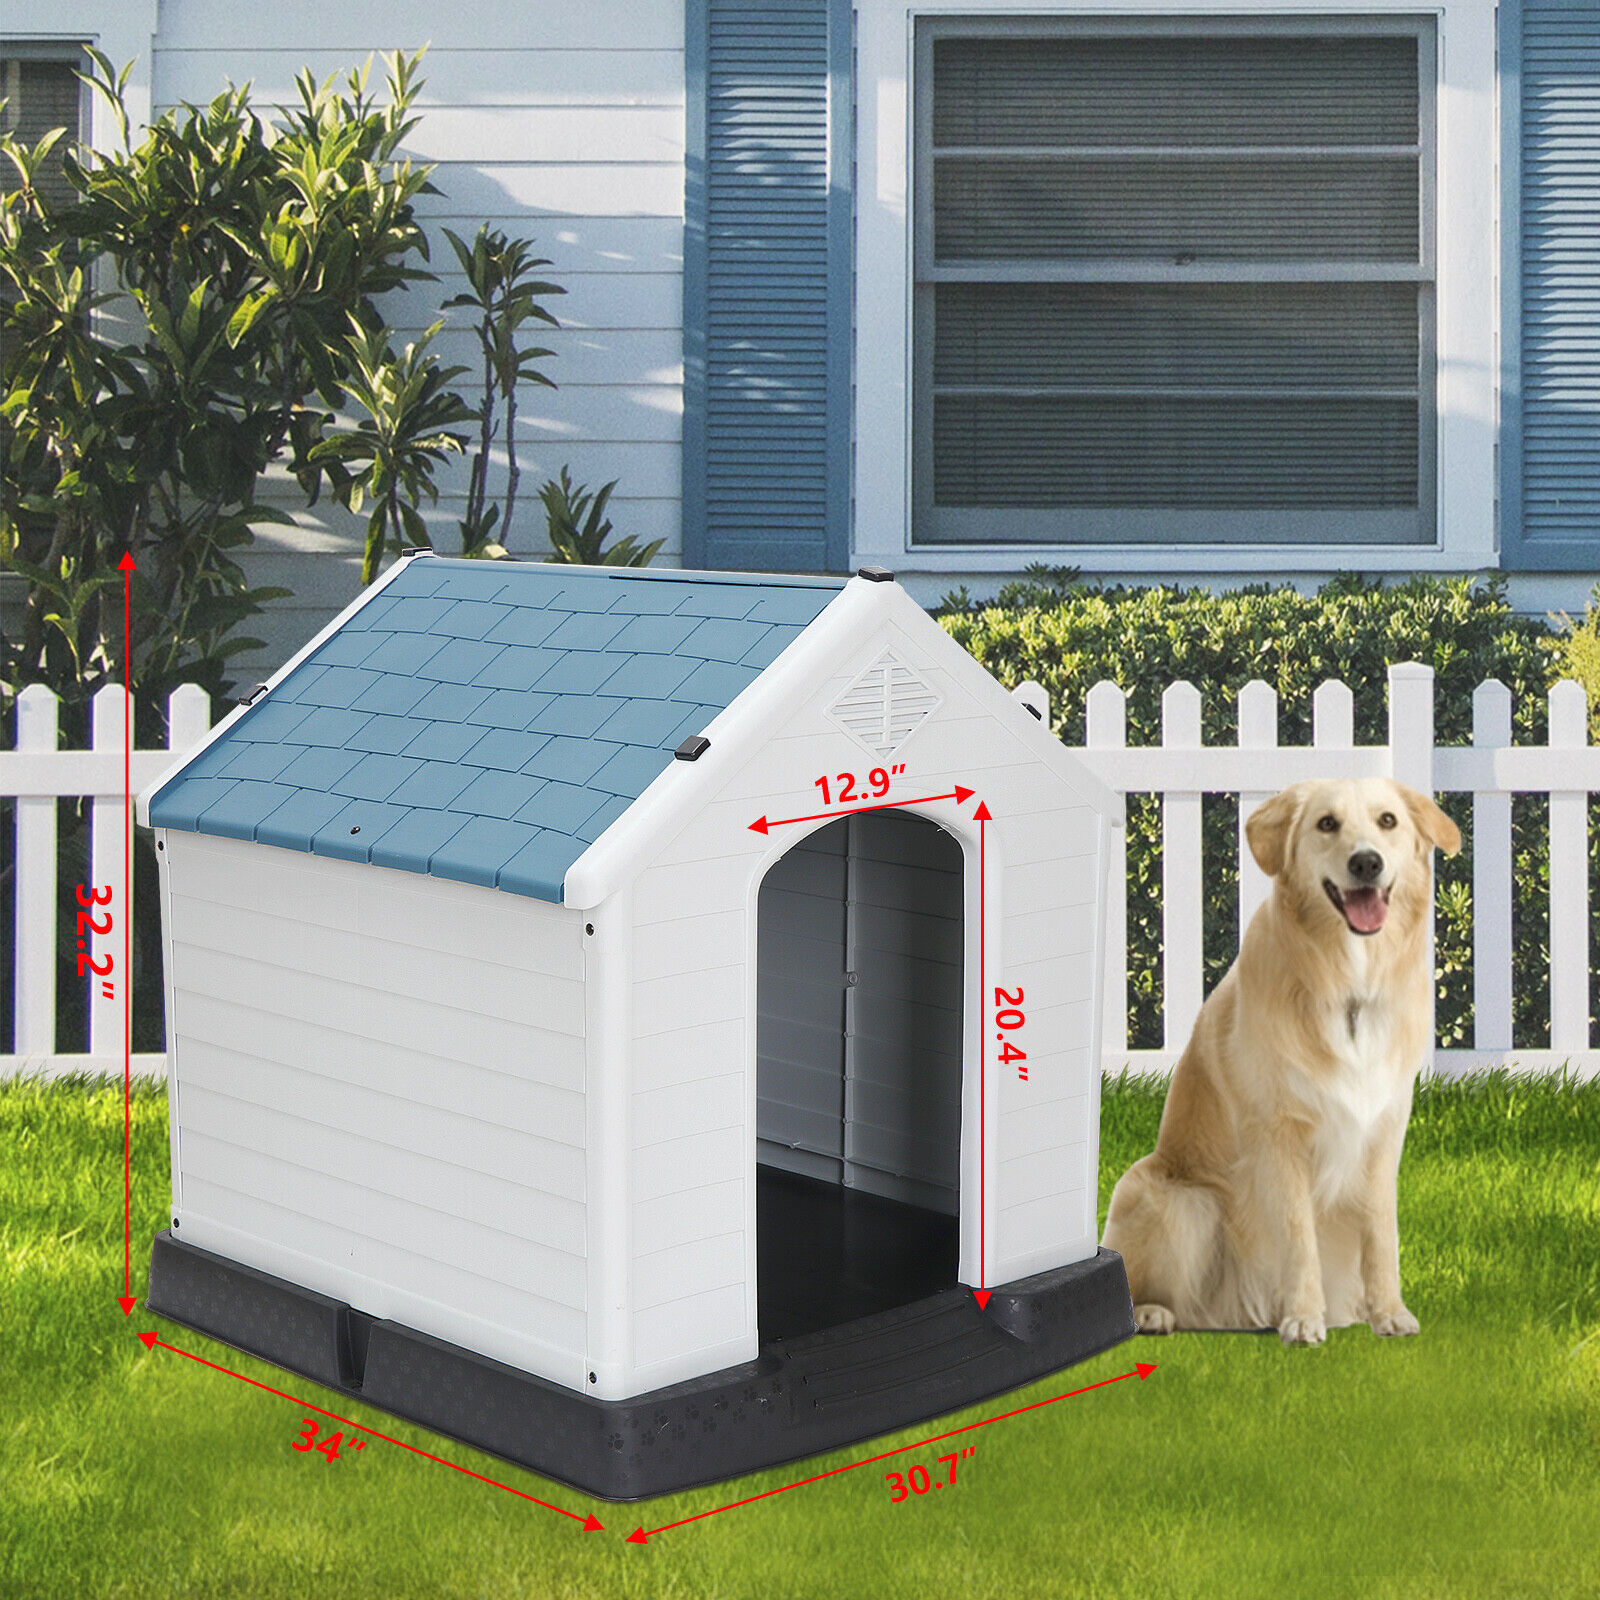 Great Choice Products Large Dog House Durable Plastic Et Kennel Crate With Air Vents Elevated Floor